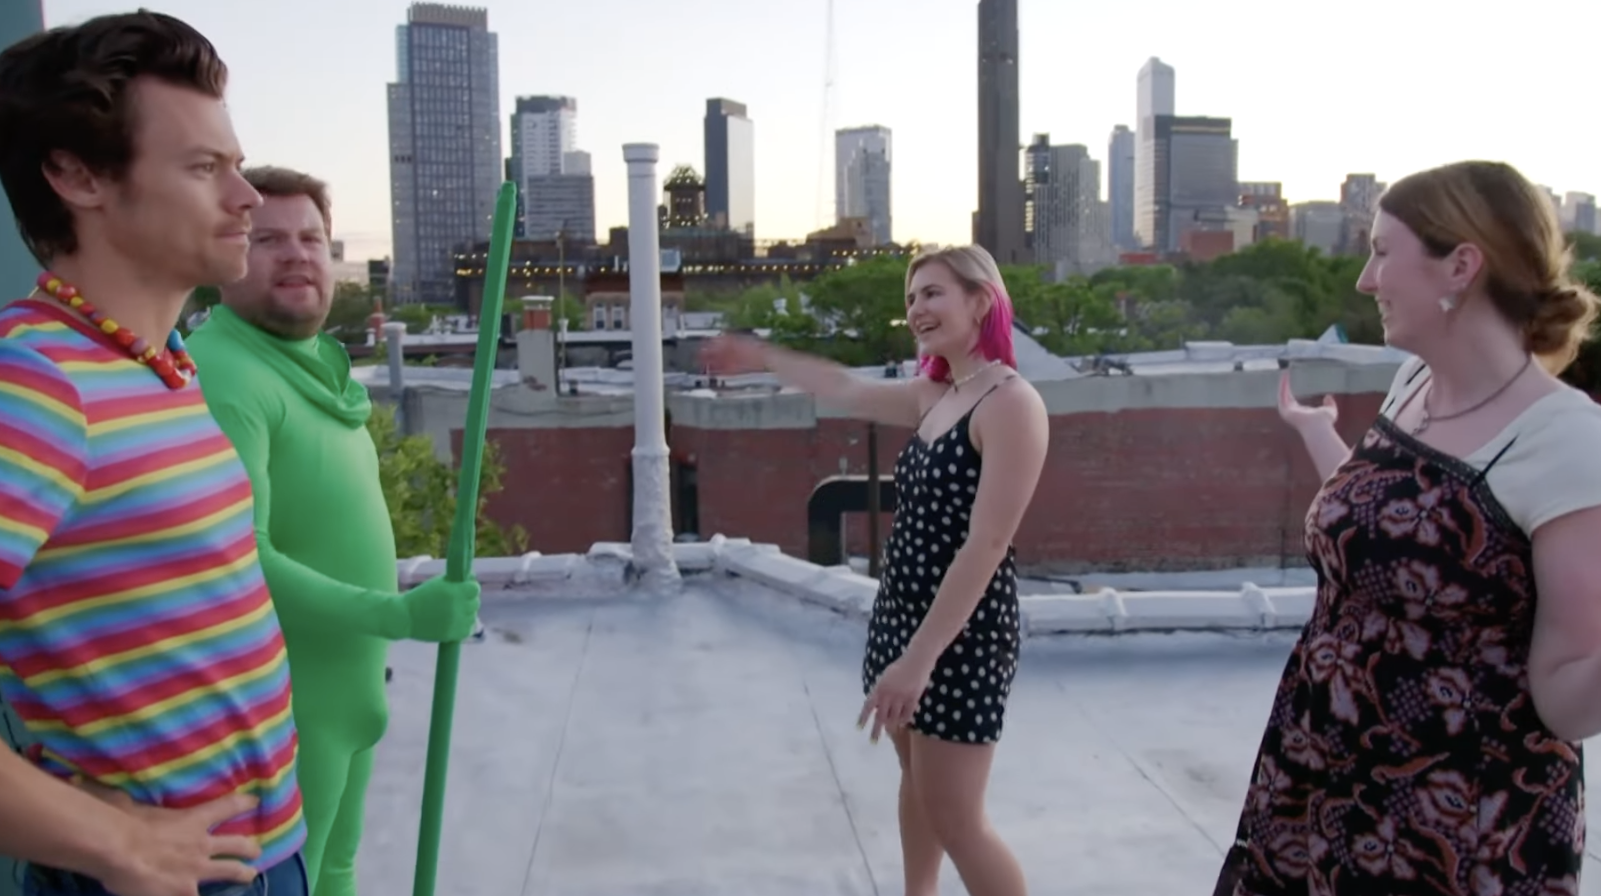 Corden wears a full-body green screen suit as Styles studies the skyline with the two women gesturing in either direction on a rooftop